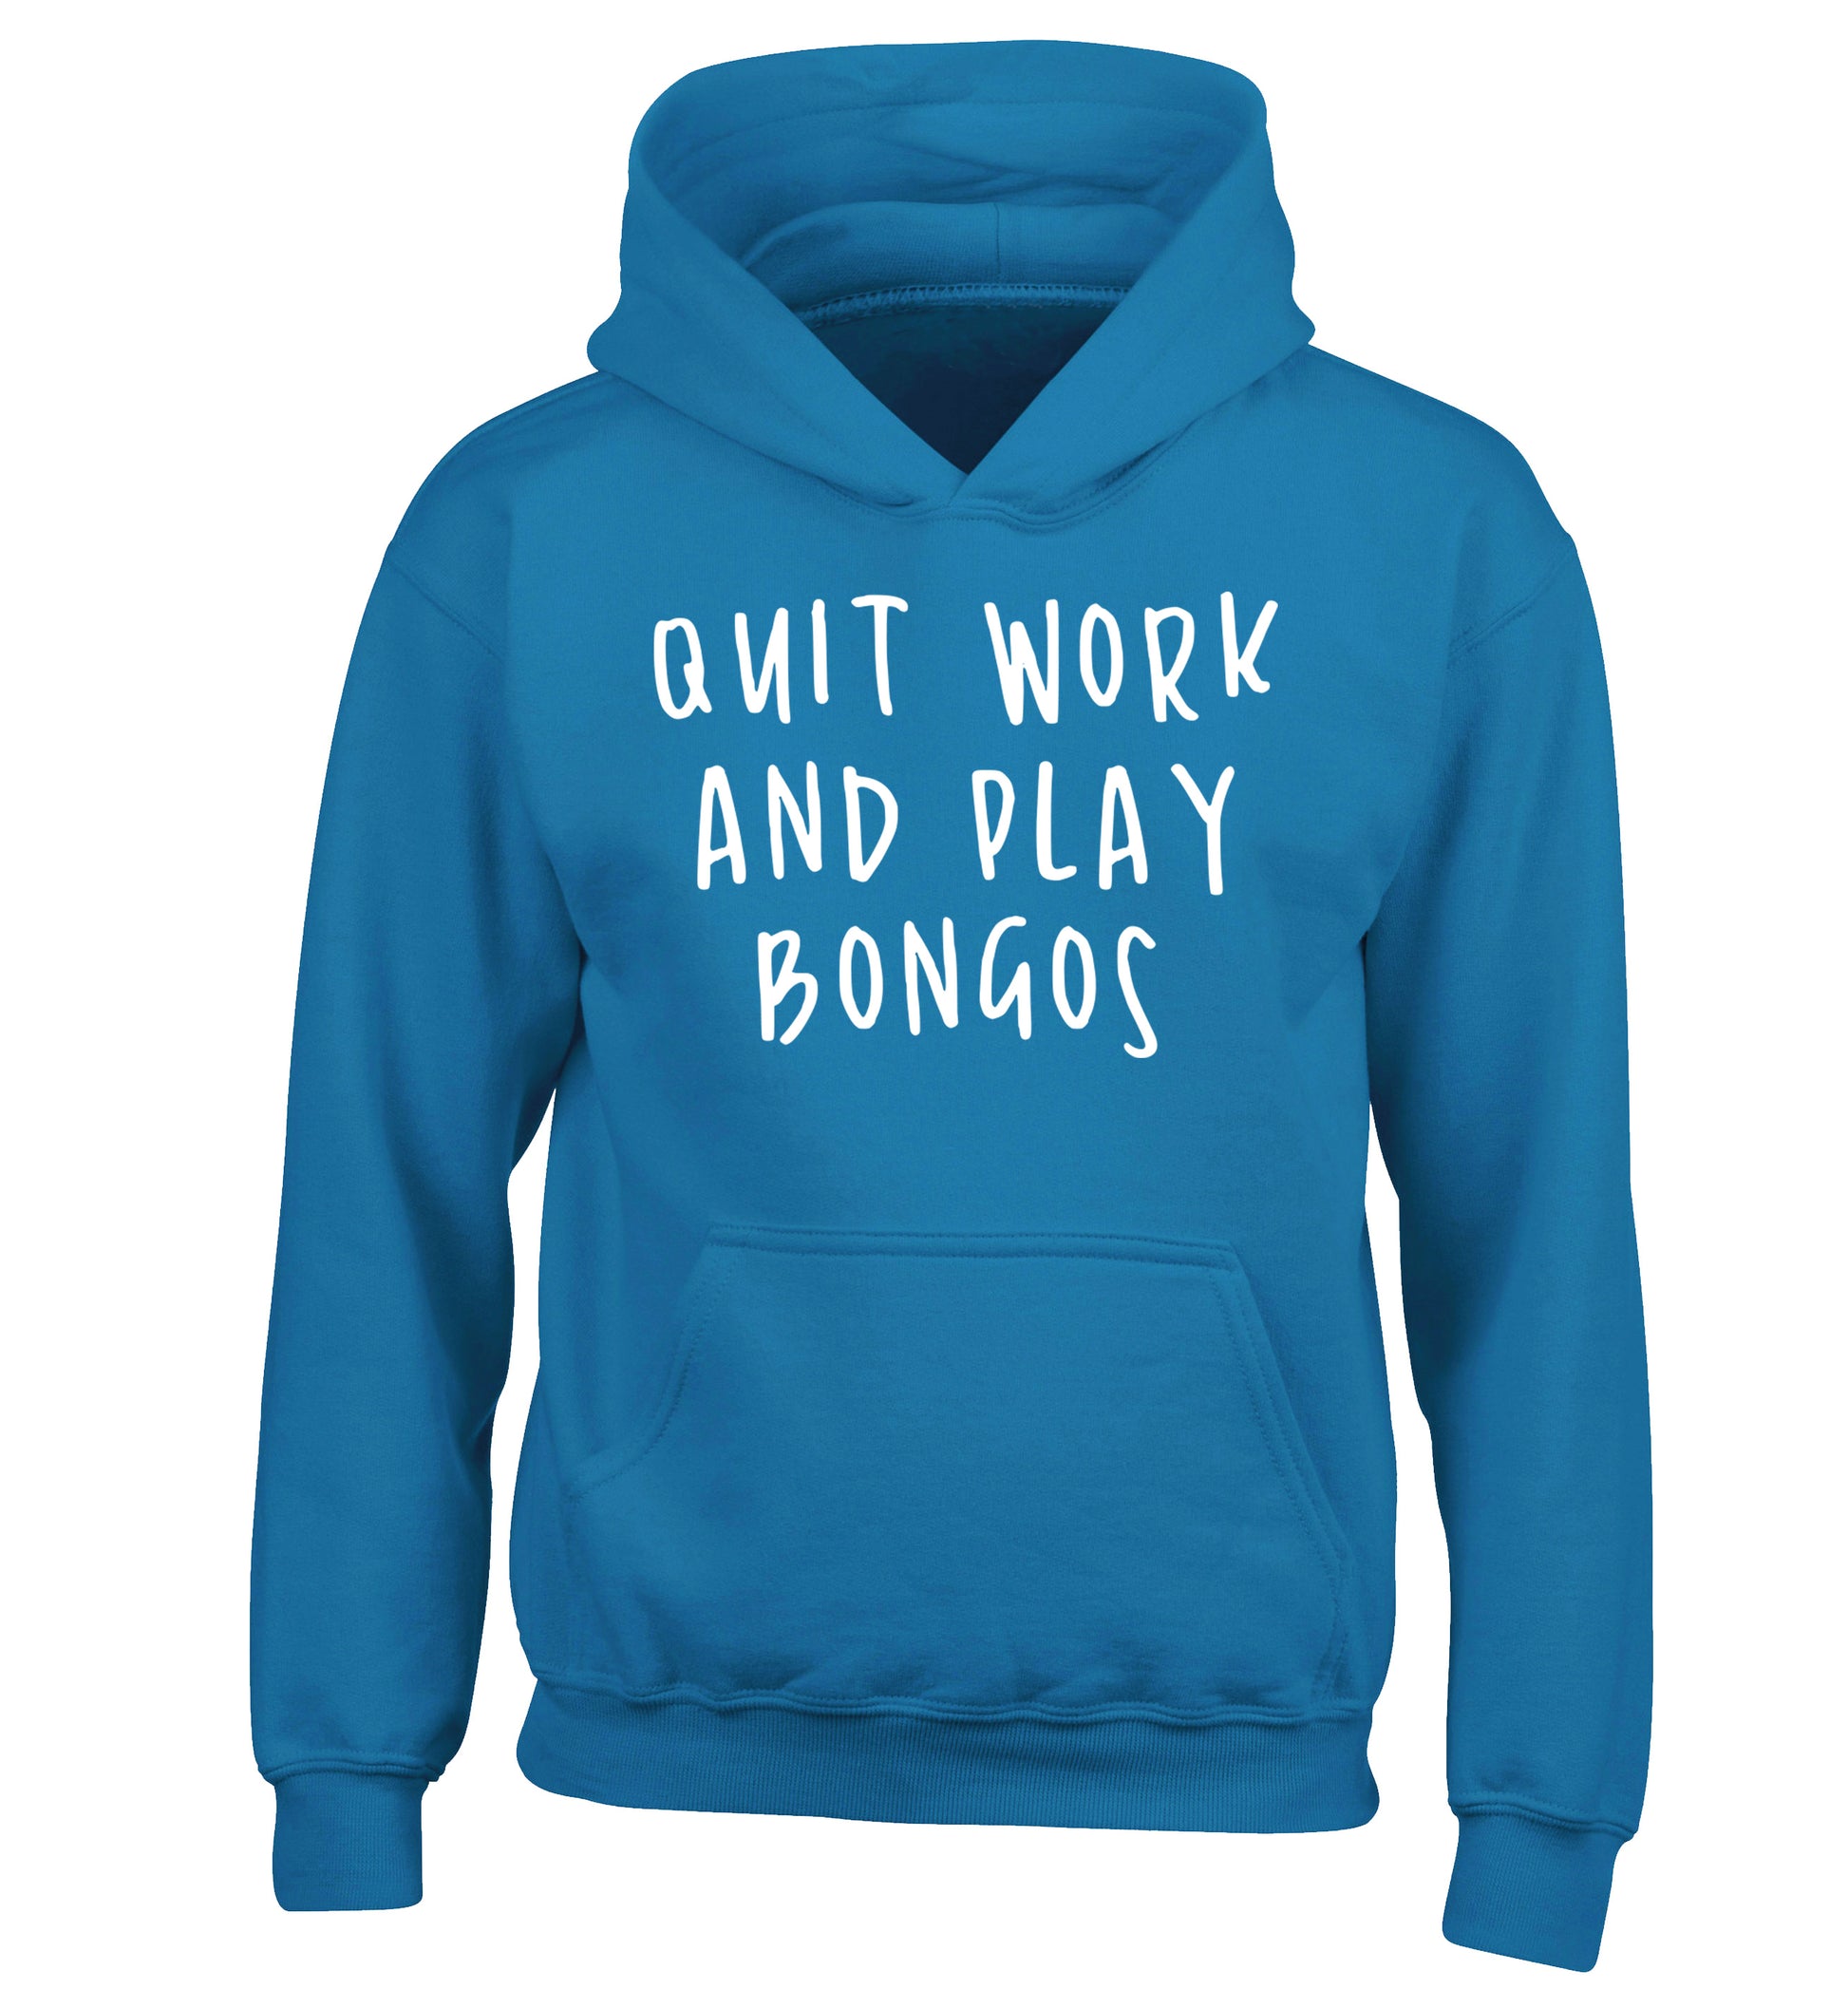 Quit work and play bongos children's blue hoodie 12-14 Years